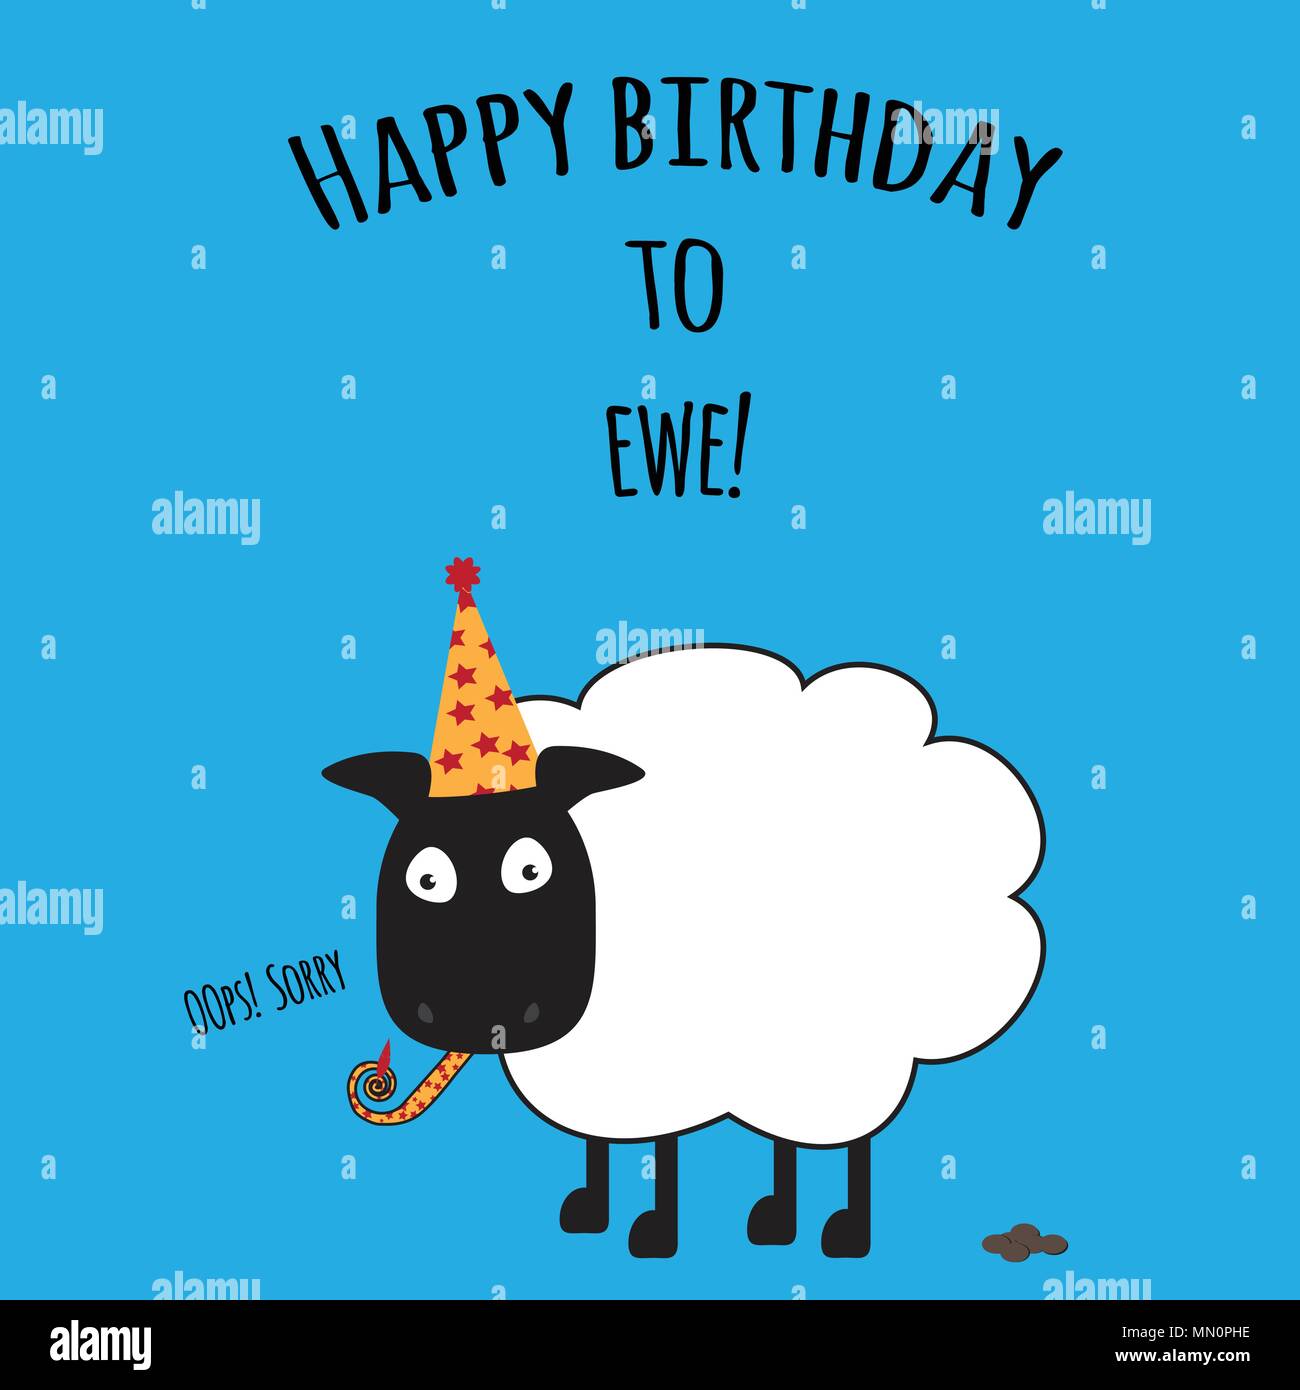 Birthday Card With Happy Birthday To Ewe With Cute Sheep Image Stock